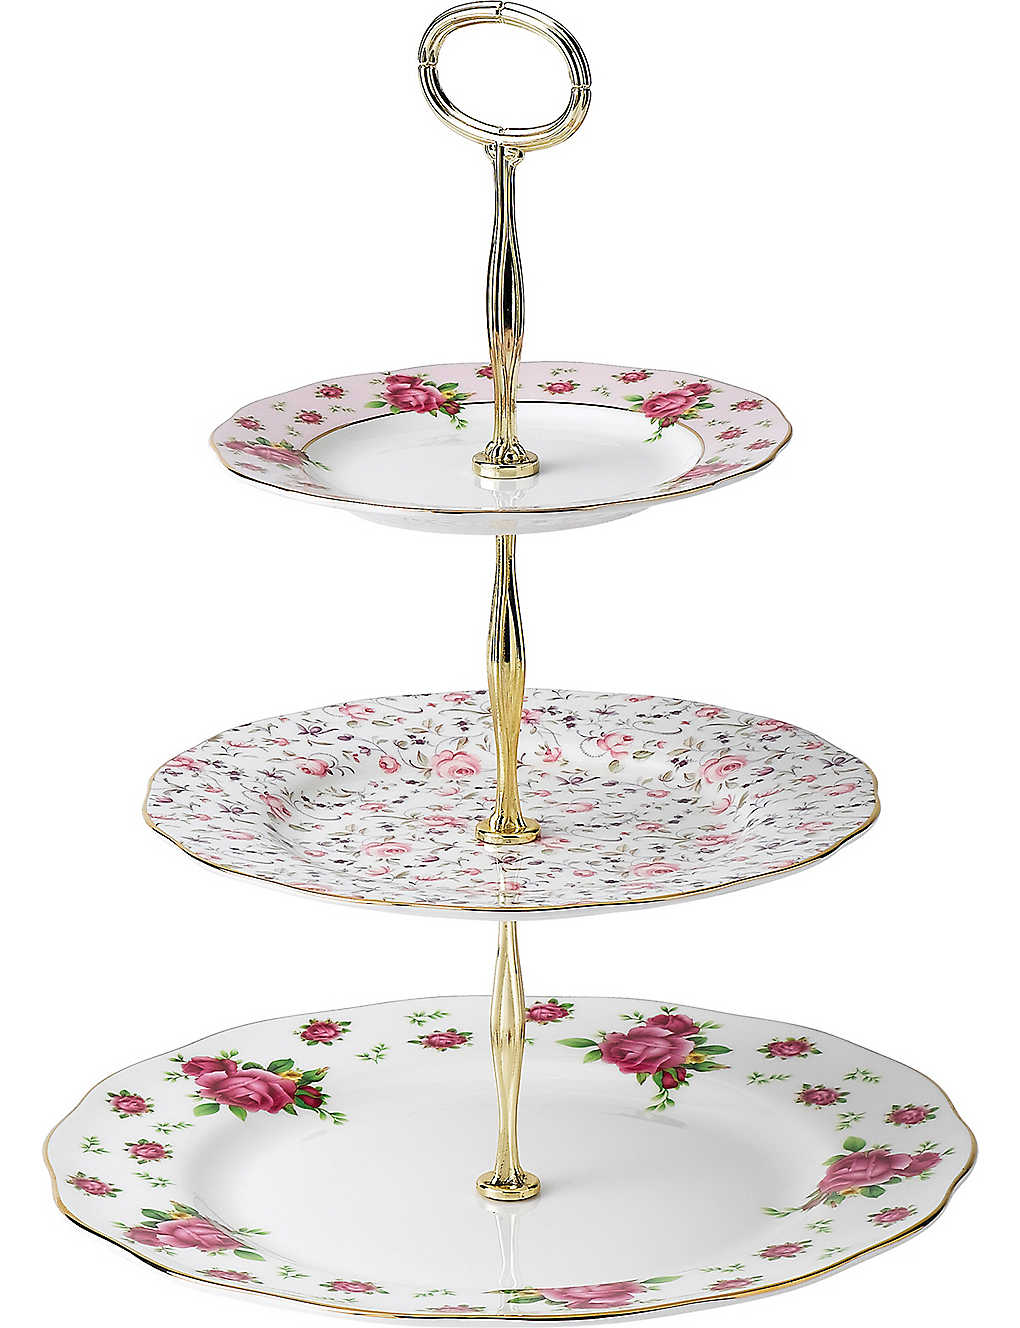 Handled Cake Plate Dessert Tray Royal Albert Forget Me Not 3 Tier Cake Plate